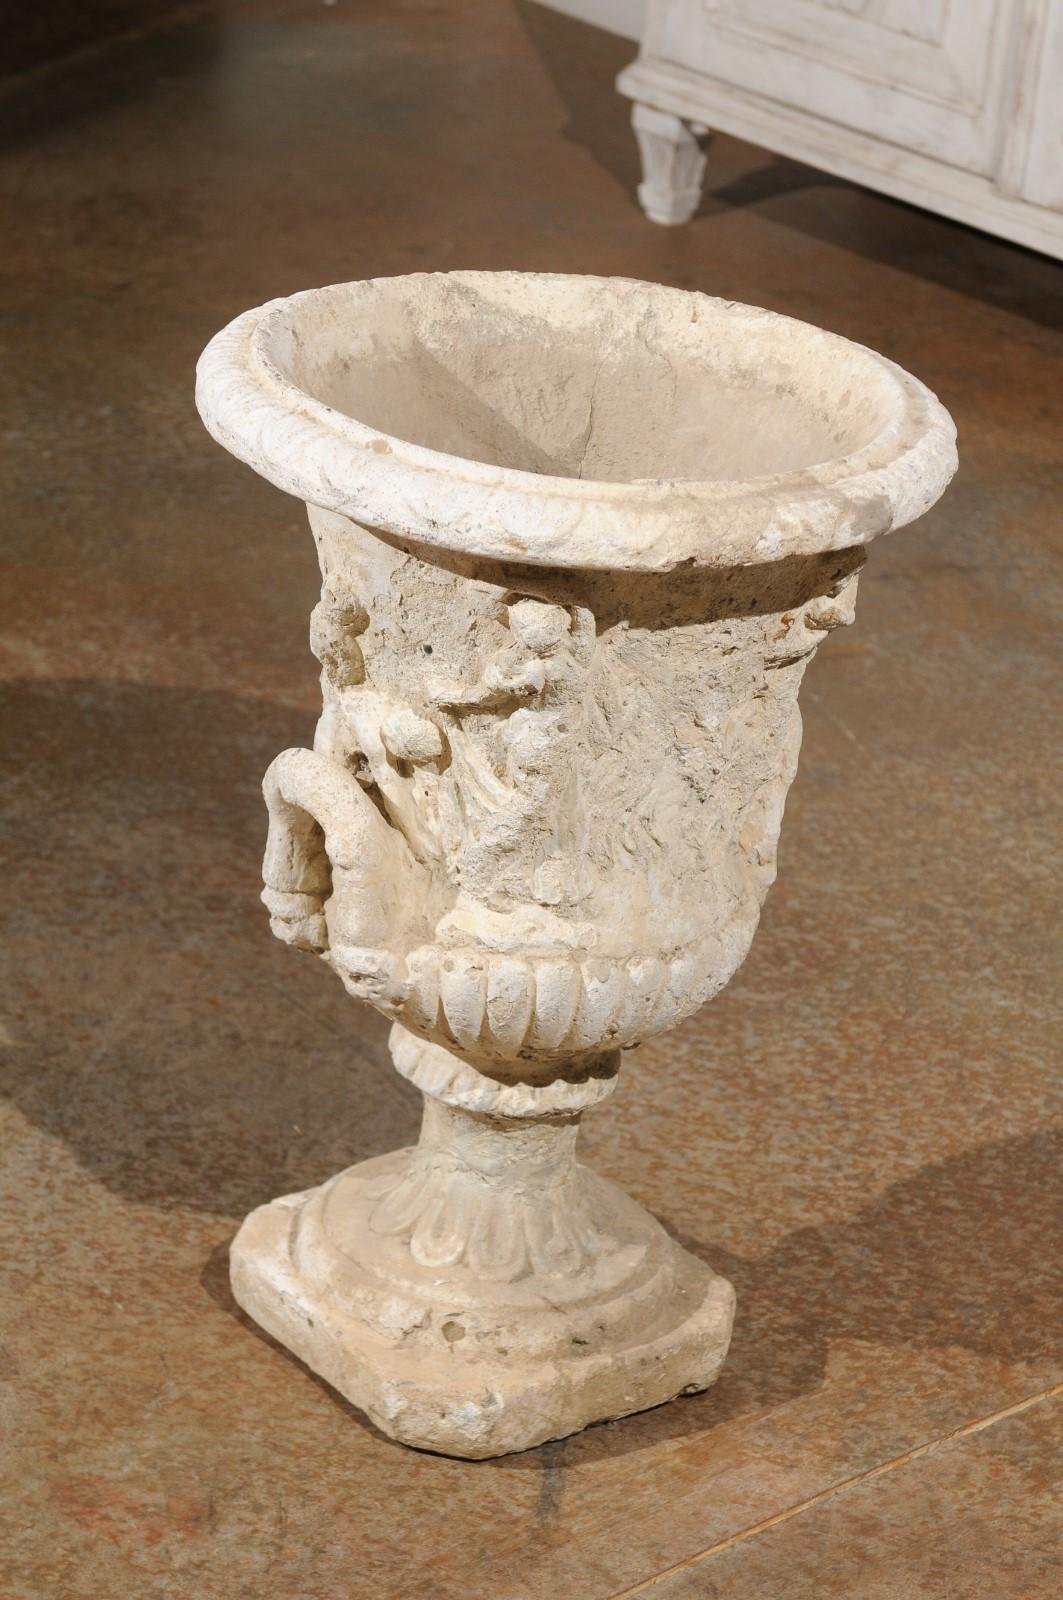 French Provençale Medici Vase Inspired Jardinière with Carved Scenes, circa 1870 In Fair Condition For Sale In Atlanta, GA